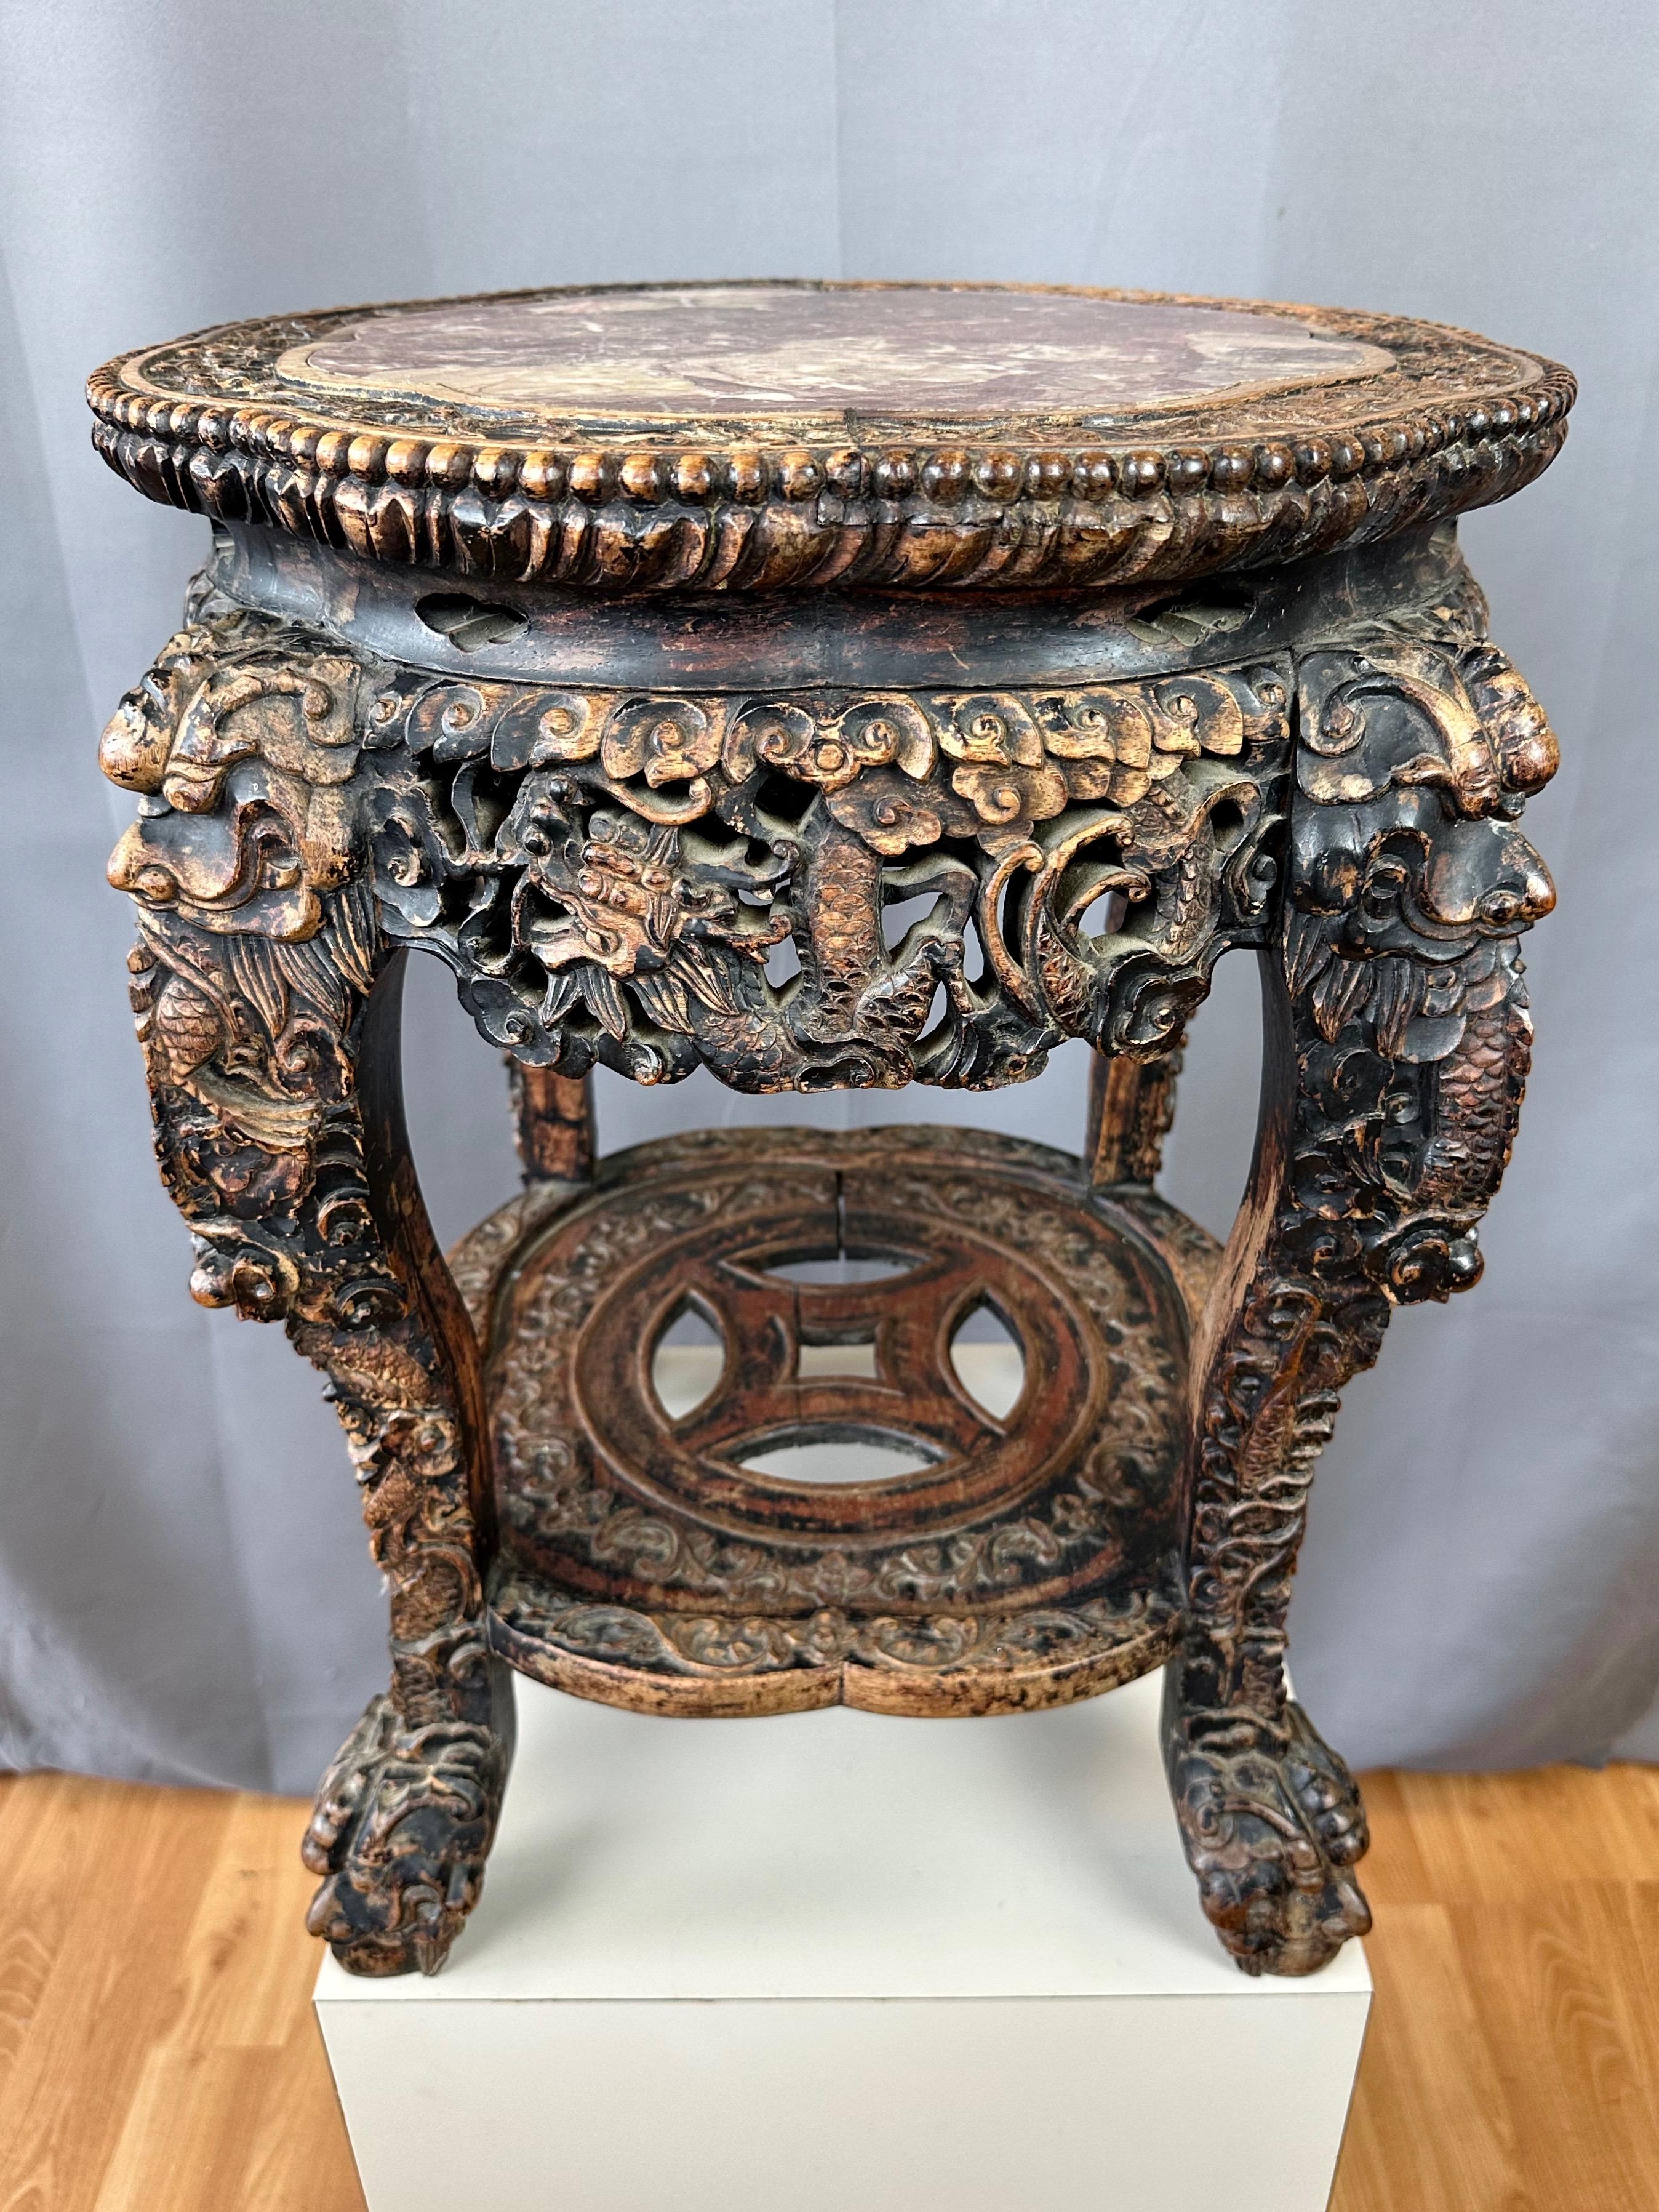 A mid-19th century Chinese Qing dynasty era dragon and coin motif ebonized hand-carved elm and marble two-tier taboret. Perfectly sized and suited to serve as a side table upon which to display a lamp, vase, art object, or plant.

Features a